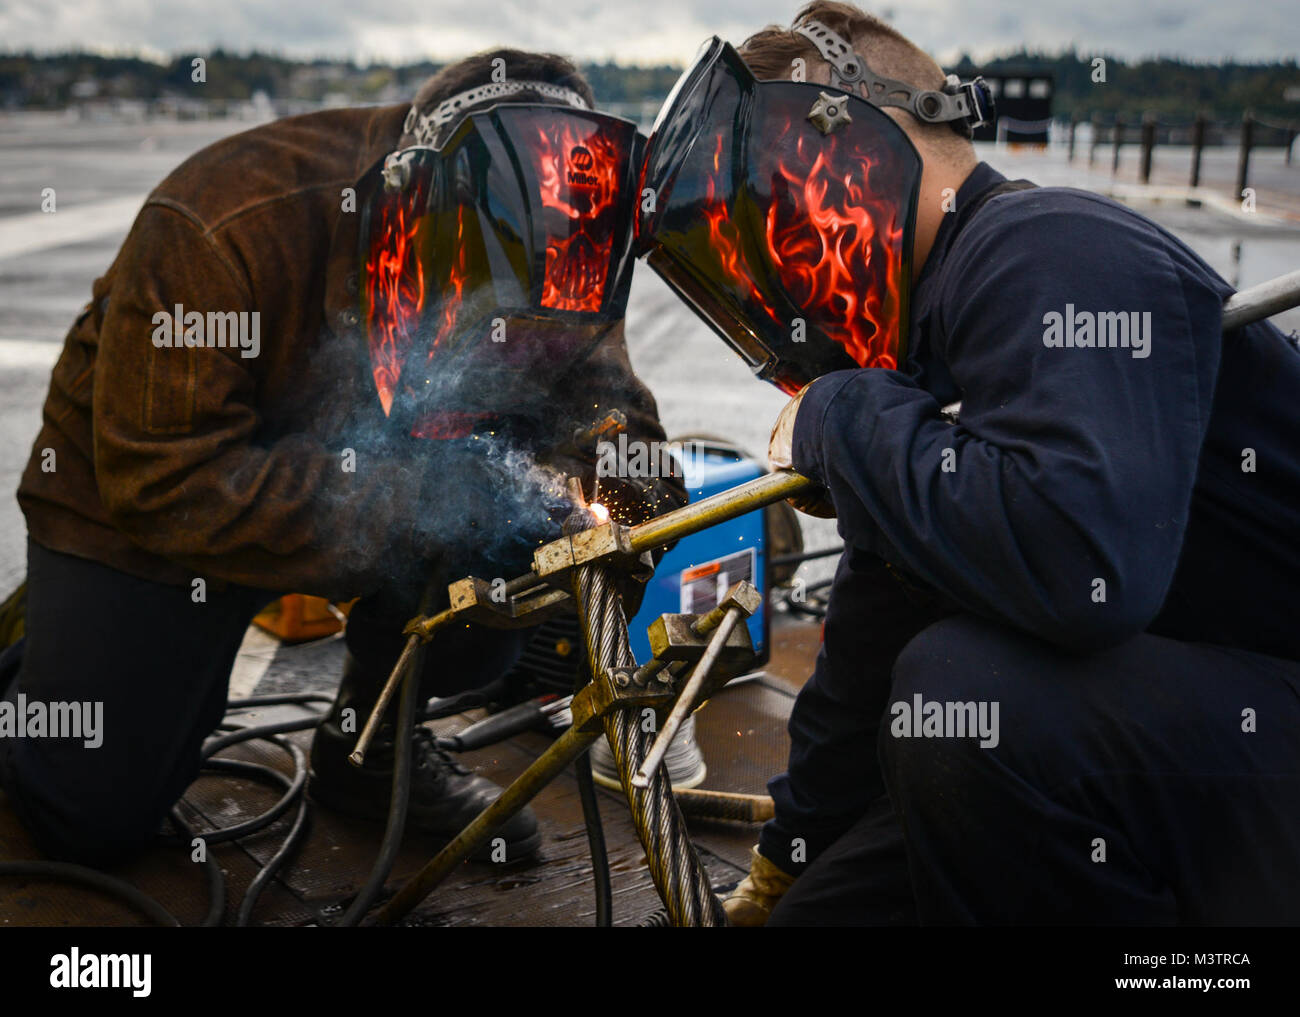 NAVAL BASE KITSAP-BREMERTON, Wash. (Oct. 2, 2016) - Seaman Chase Ethridge (right), a native of Katy, Texas, steadies an arresting cable while Petty Officer 3rd Class Gabriel Moreno, a native of Huntington Beach, Calif., welds during a reweave of the arresting gear on board USS Nimitz (CVN 68). Nimitz is currently undergoing an extended planned incremental maintenance availability at Puget Sound Naval Shipyard and Intermediate Maintenance Facility where the ship is receiving scheduled maintenance and upgrades. (U.S. Navy photo by Petty Officer 3rd Class Samuel Bacon/Released) Sailors weld arres Stock Photo